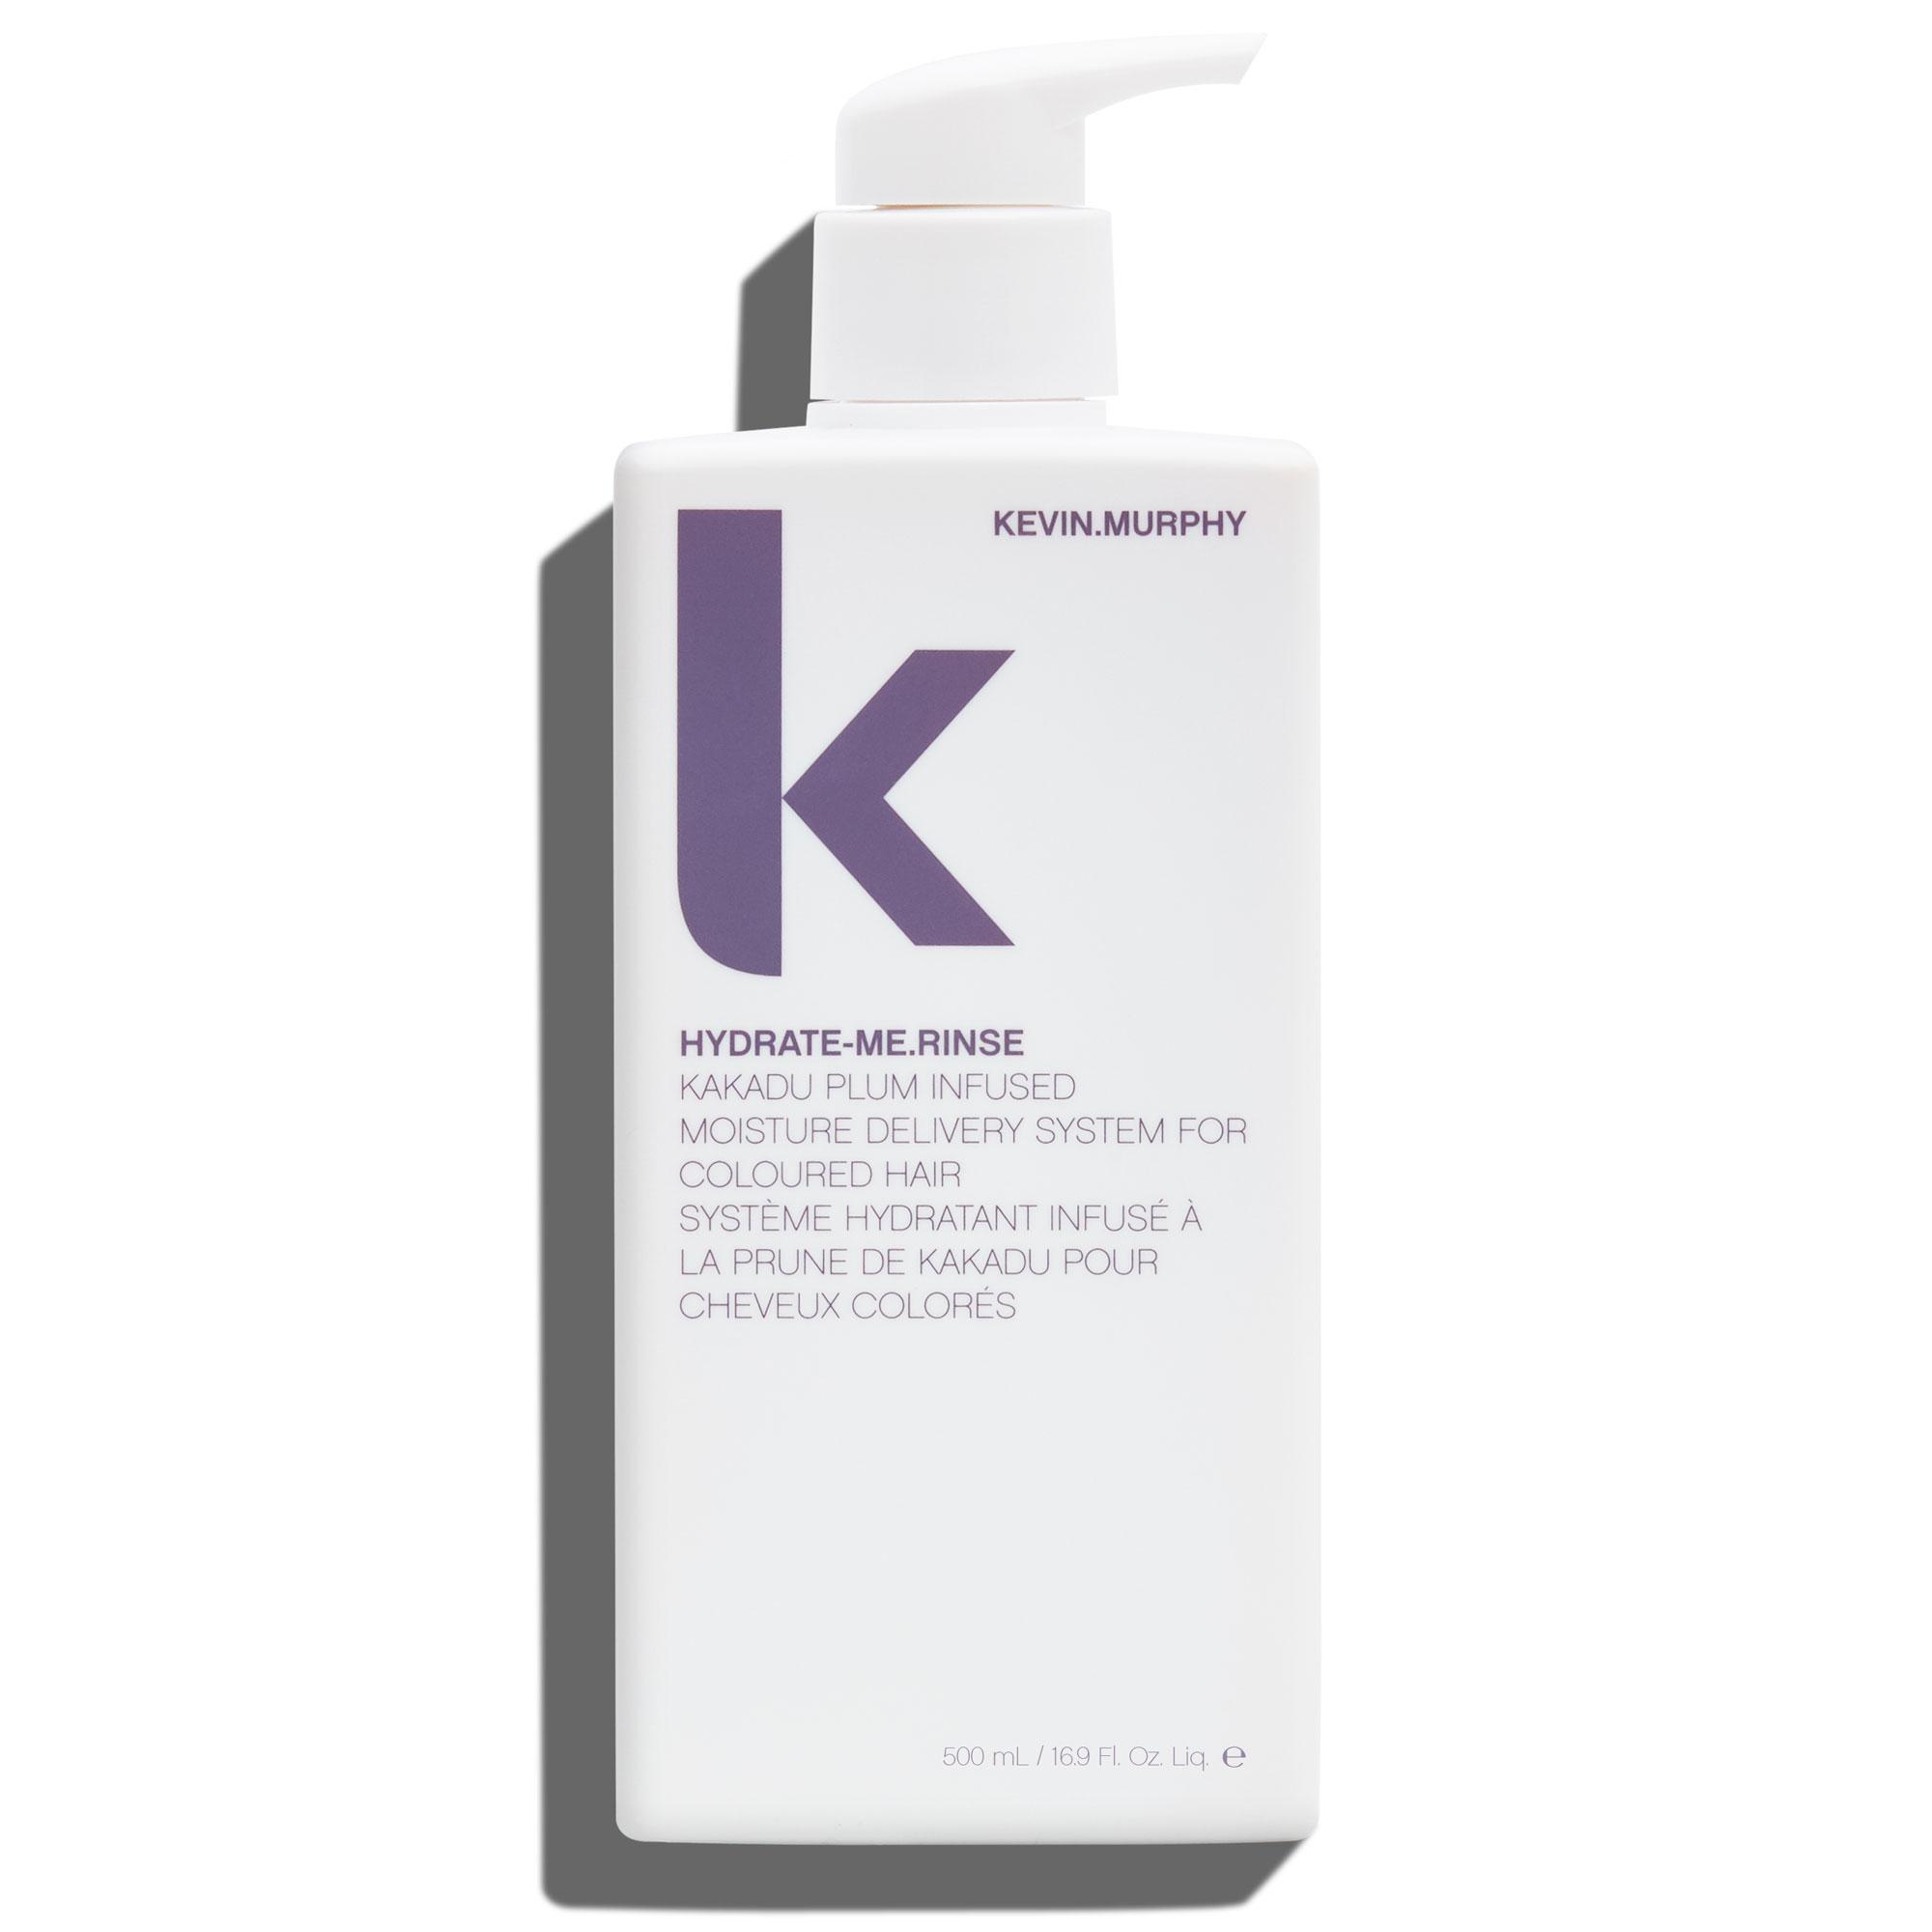 KEVIN.MURPHY HYDRATE.ME RINSE (Limited Edition)